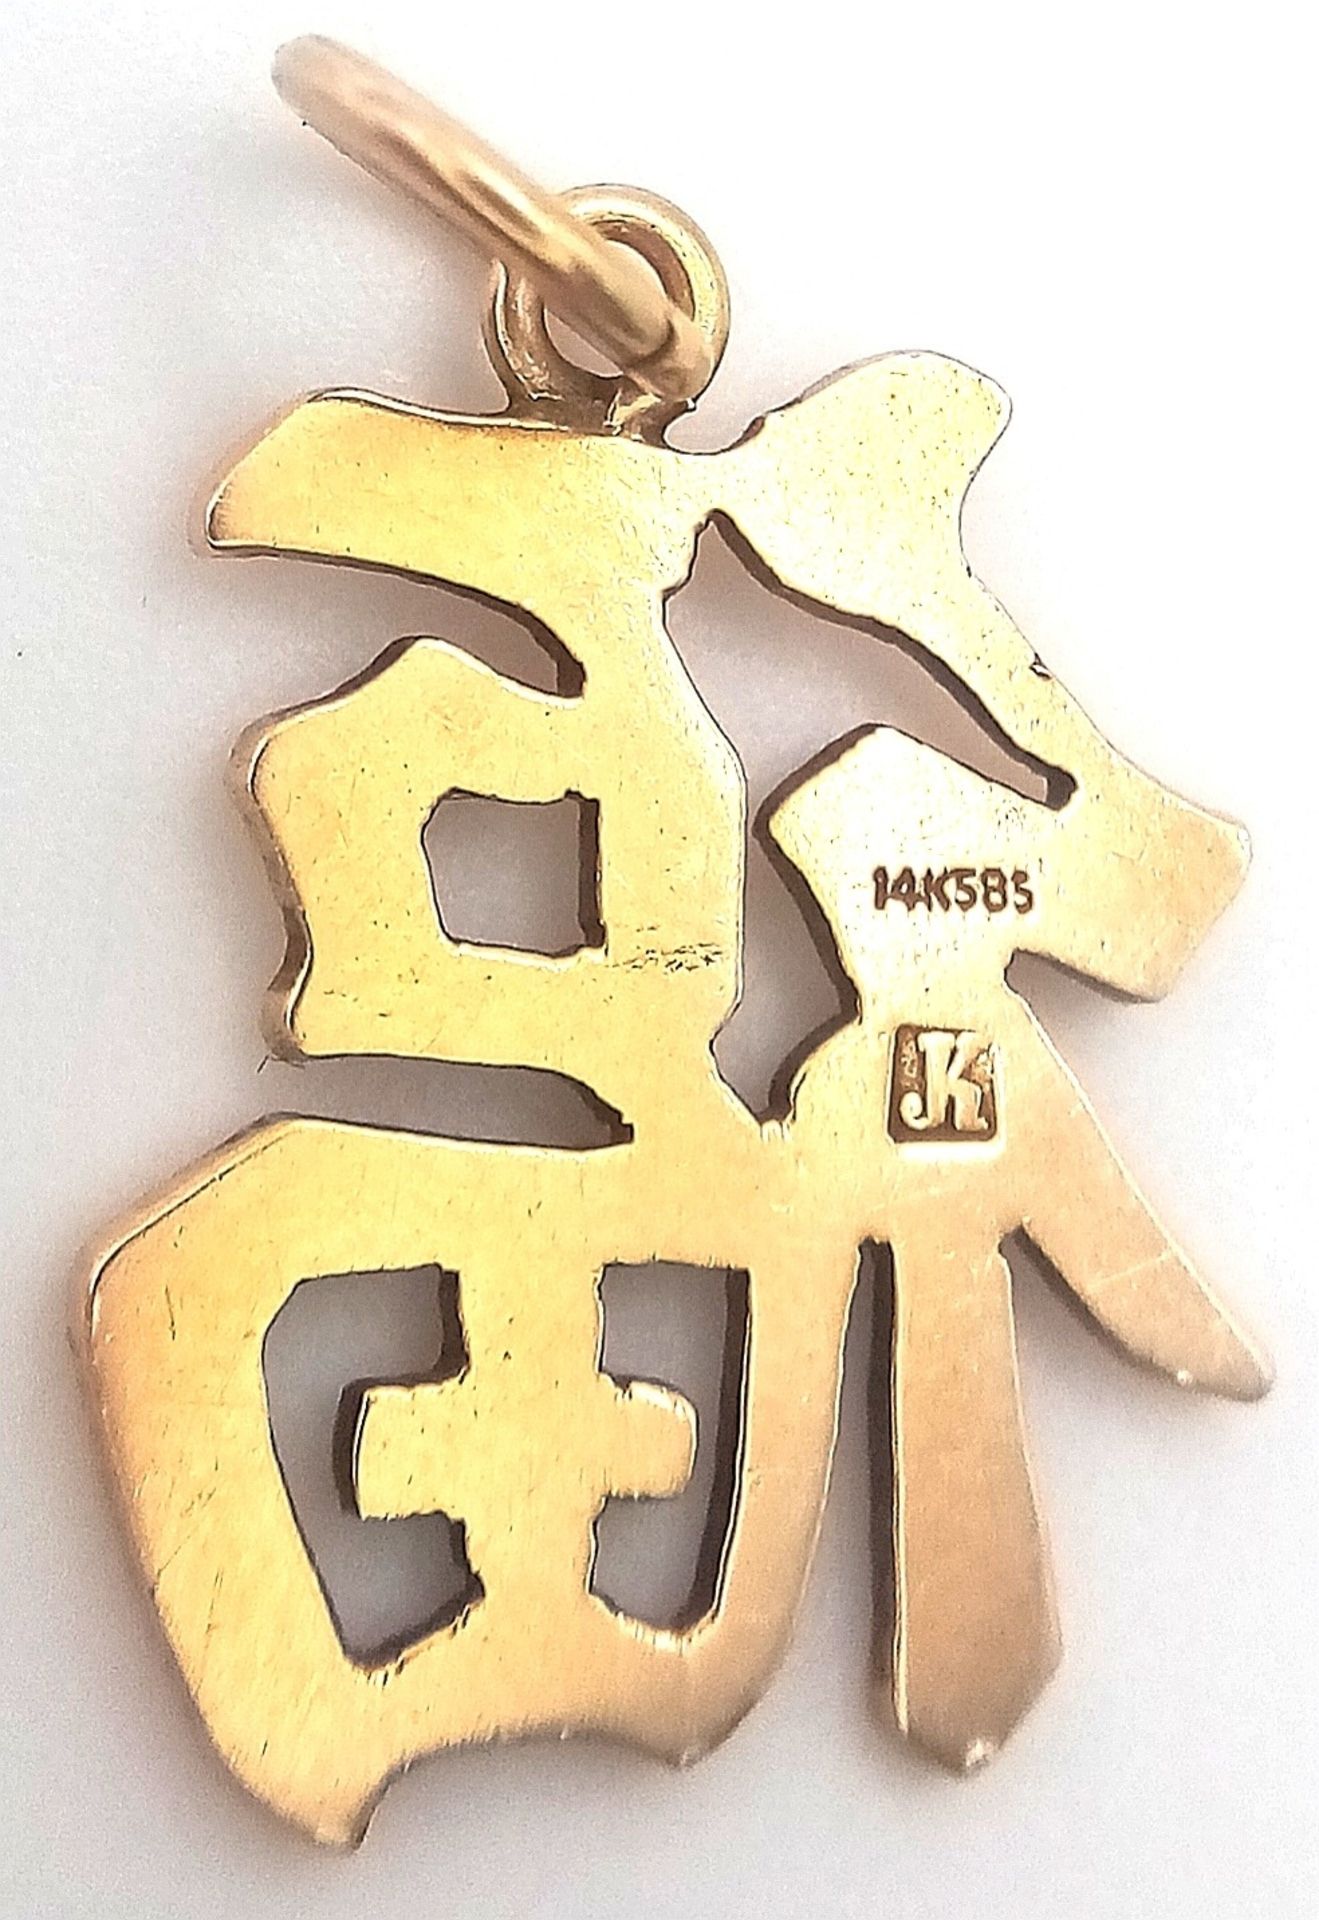 A 14K YELLOW GOLD CHINESE GOOD LUCK/HAPPINESS CHARM/PENDANT. 2.2cm, 1.7g total weight. Ref: SC 8058 - Image 4 of 6